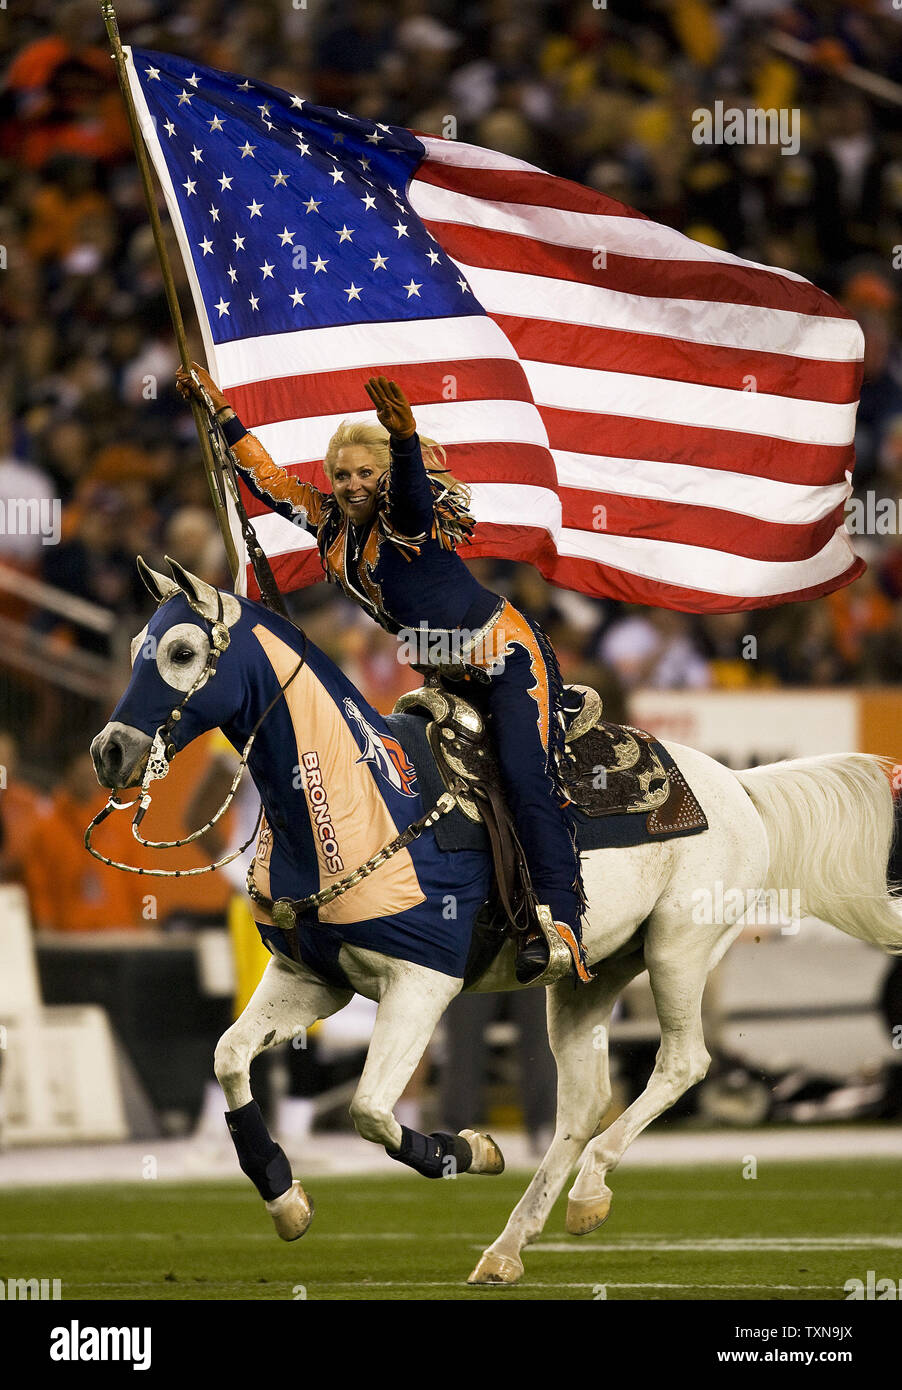 Ann Judge-Wegener rides the Denver Broncos mascot, Thunder, after the Broncos scored against the Pittsburgh Steelers during the first quarter at Invesco Field at Mile High in Denver on November 9, 2009.       UPI/Gary C. Caskey... Stock Photo